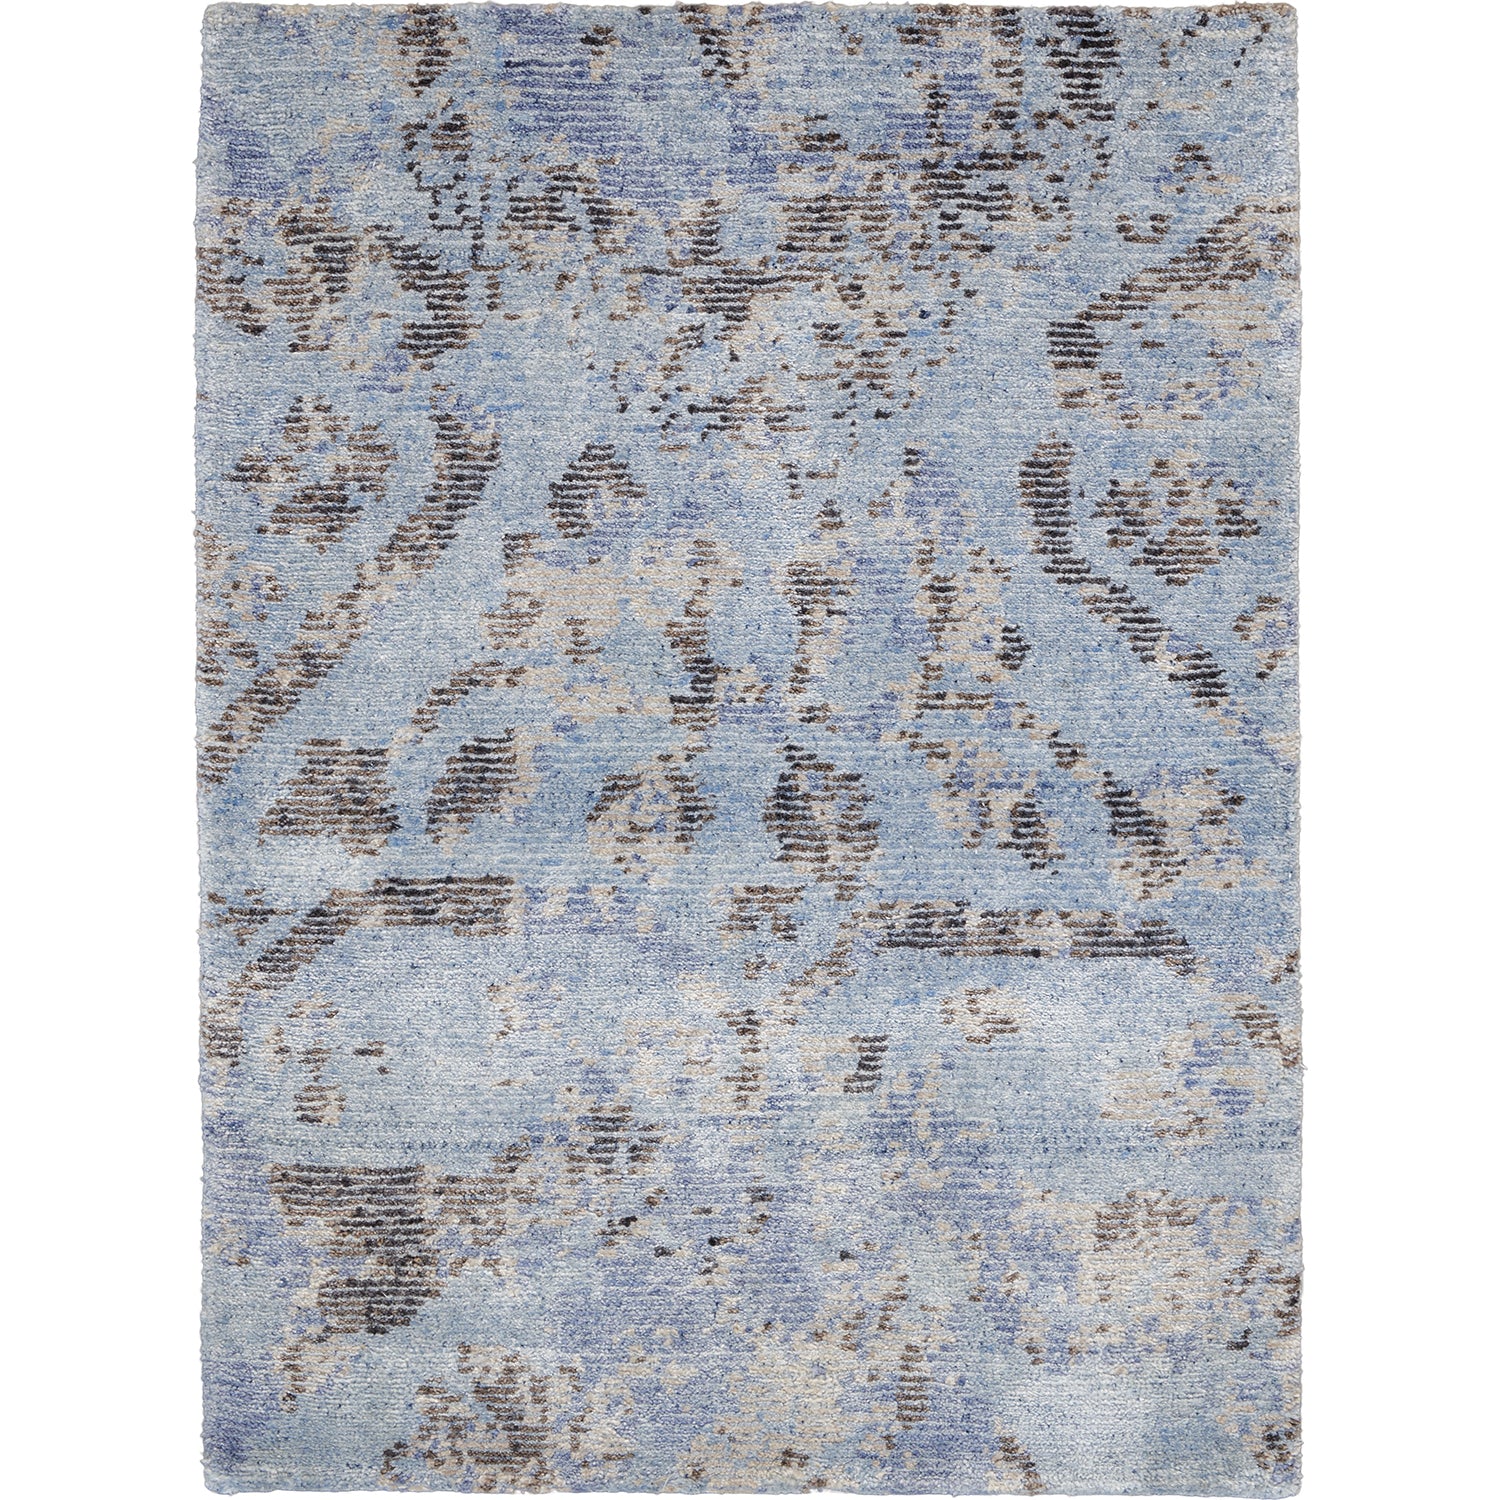 Abstract, distressed rectangular area rug in soft blue with vintage design